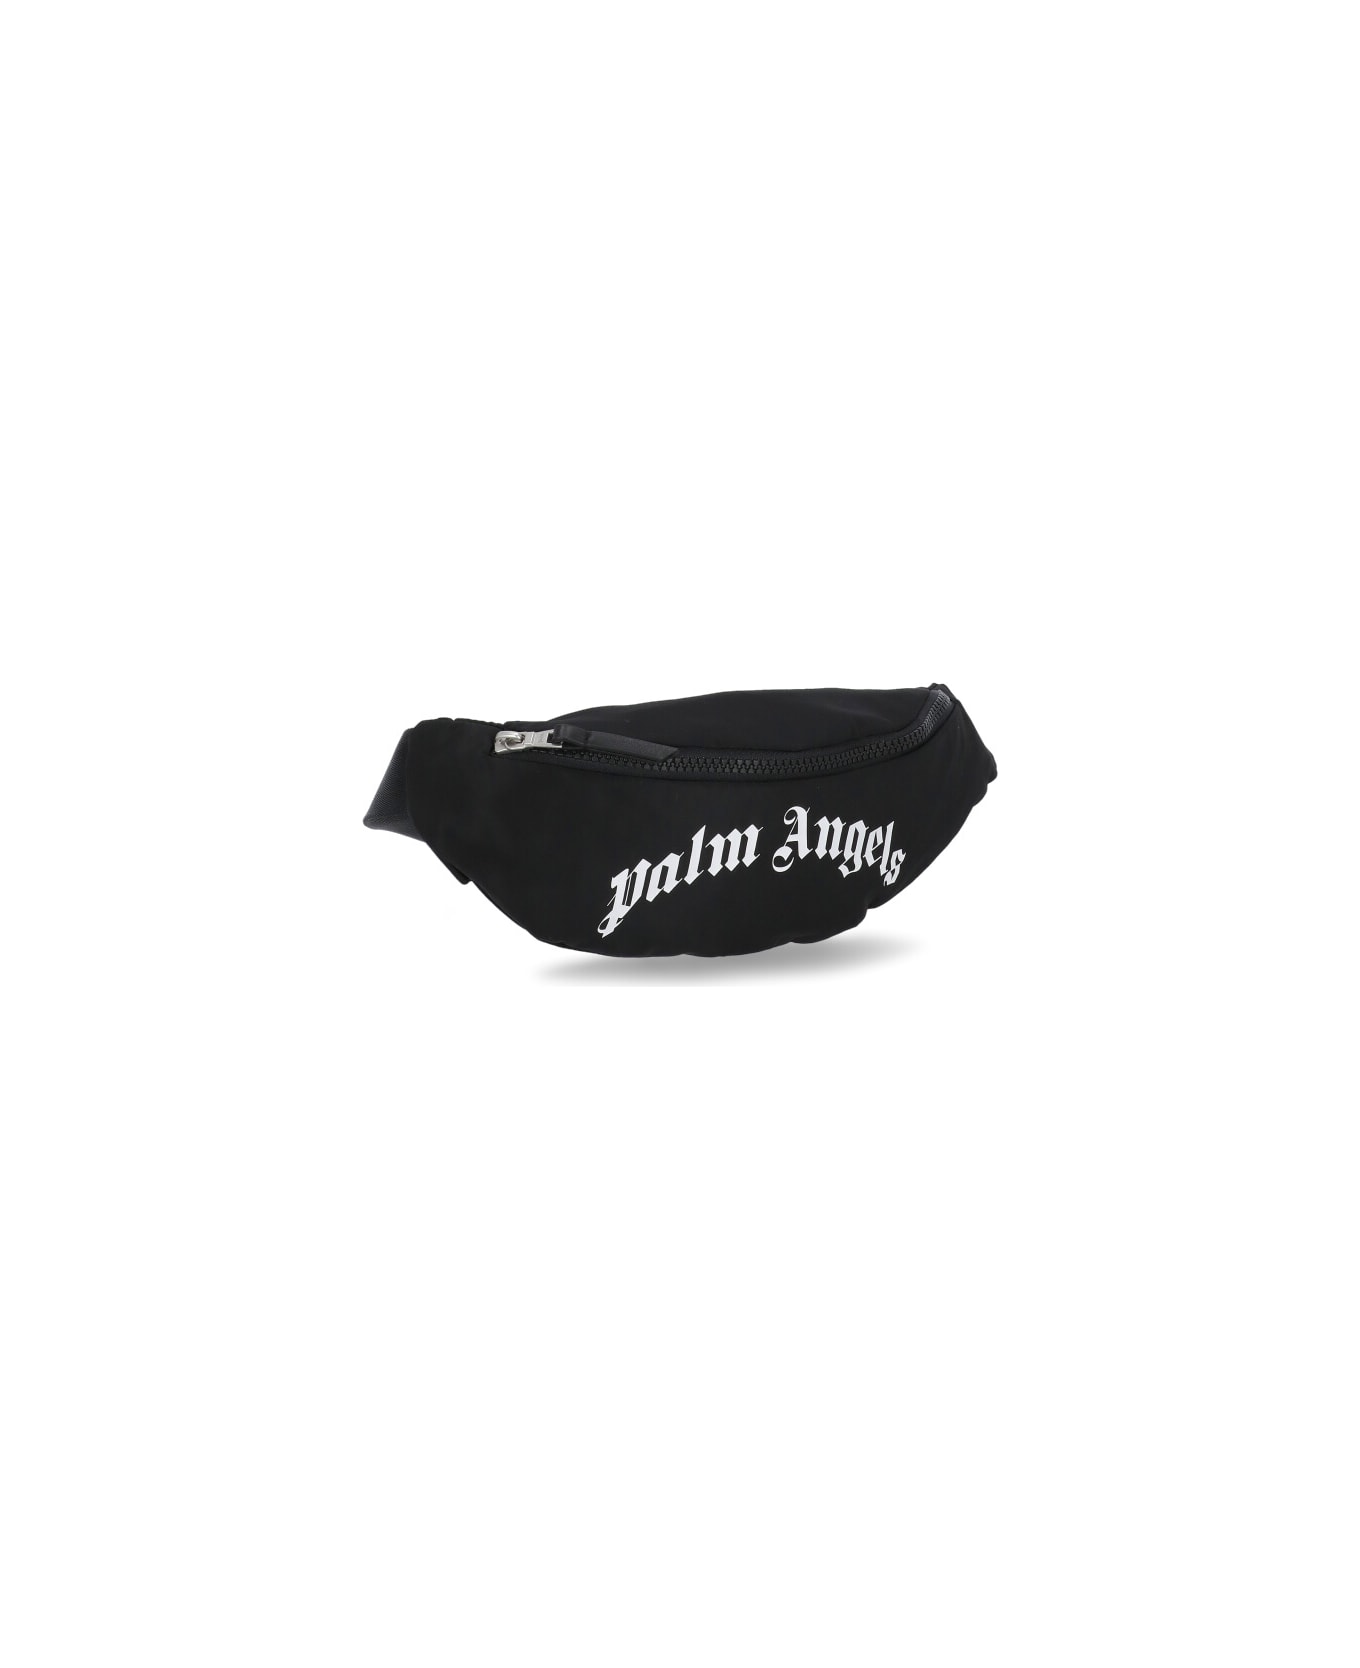 Palm Angels Curved Logo Fanny Pack Pouch - Black